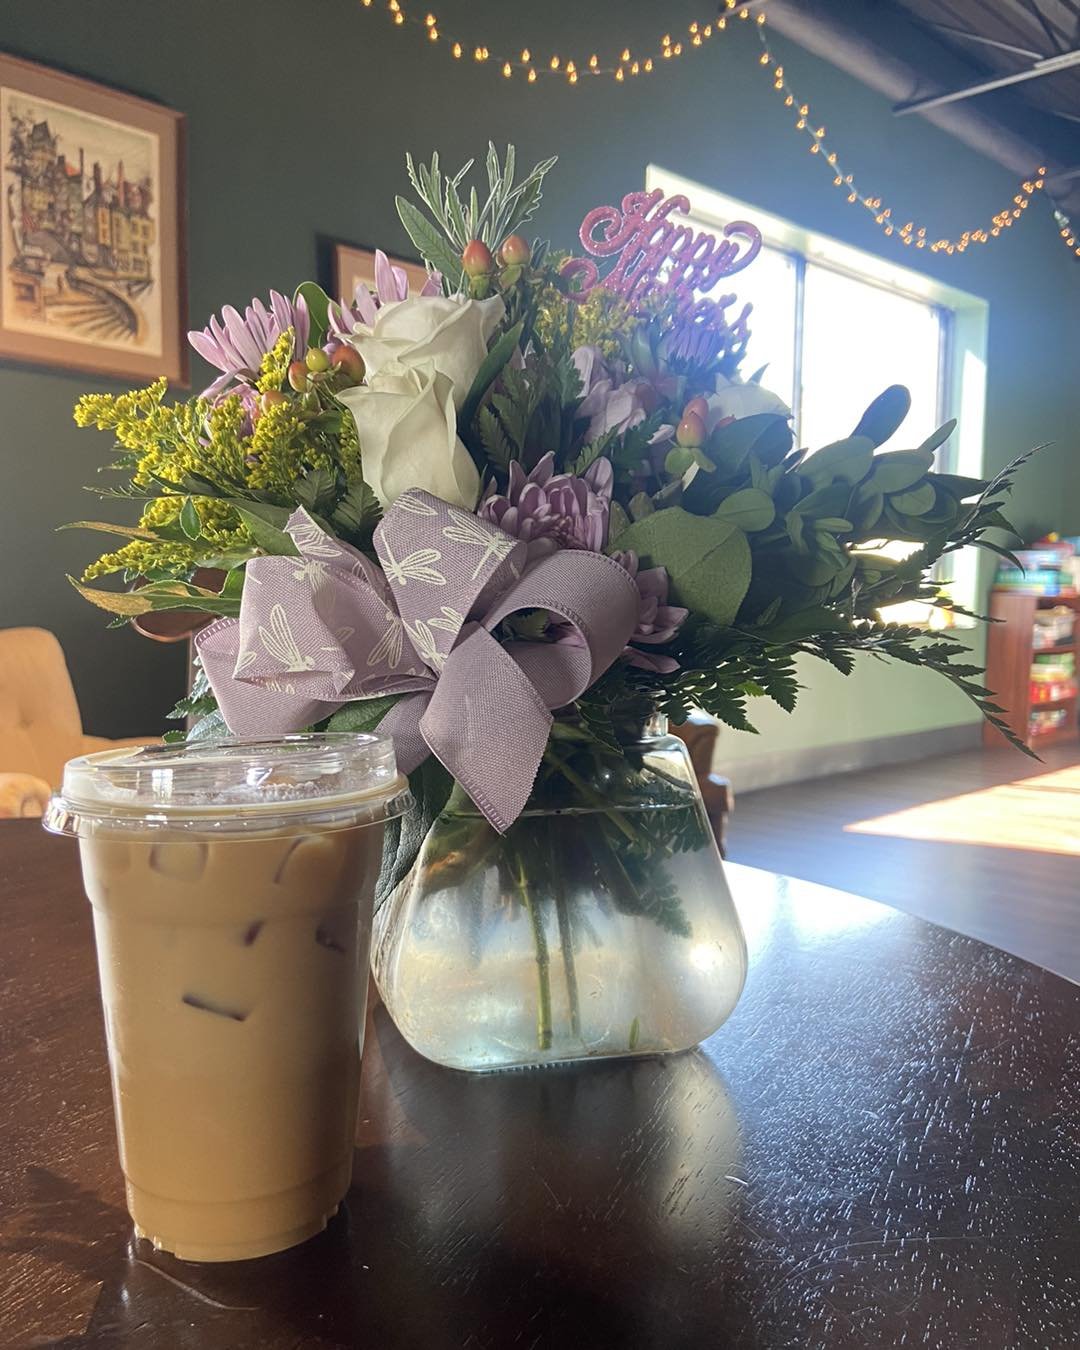 Fresh florals and delicious coffee served all day every day! ☕️💐 Open until 10pm tonight and 5pm tomorrow!
&bull;
&bull;
&bull;
#cafe #cocktail #mocktail #ohio #smallbusiness #coffeeshop #sanduskyohio #book #sandusky #bookstore #cheeseboard #coffee 